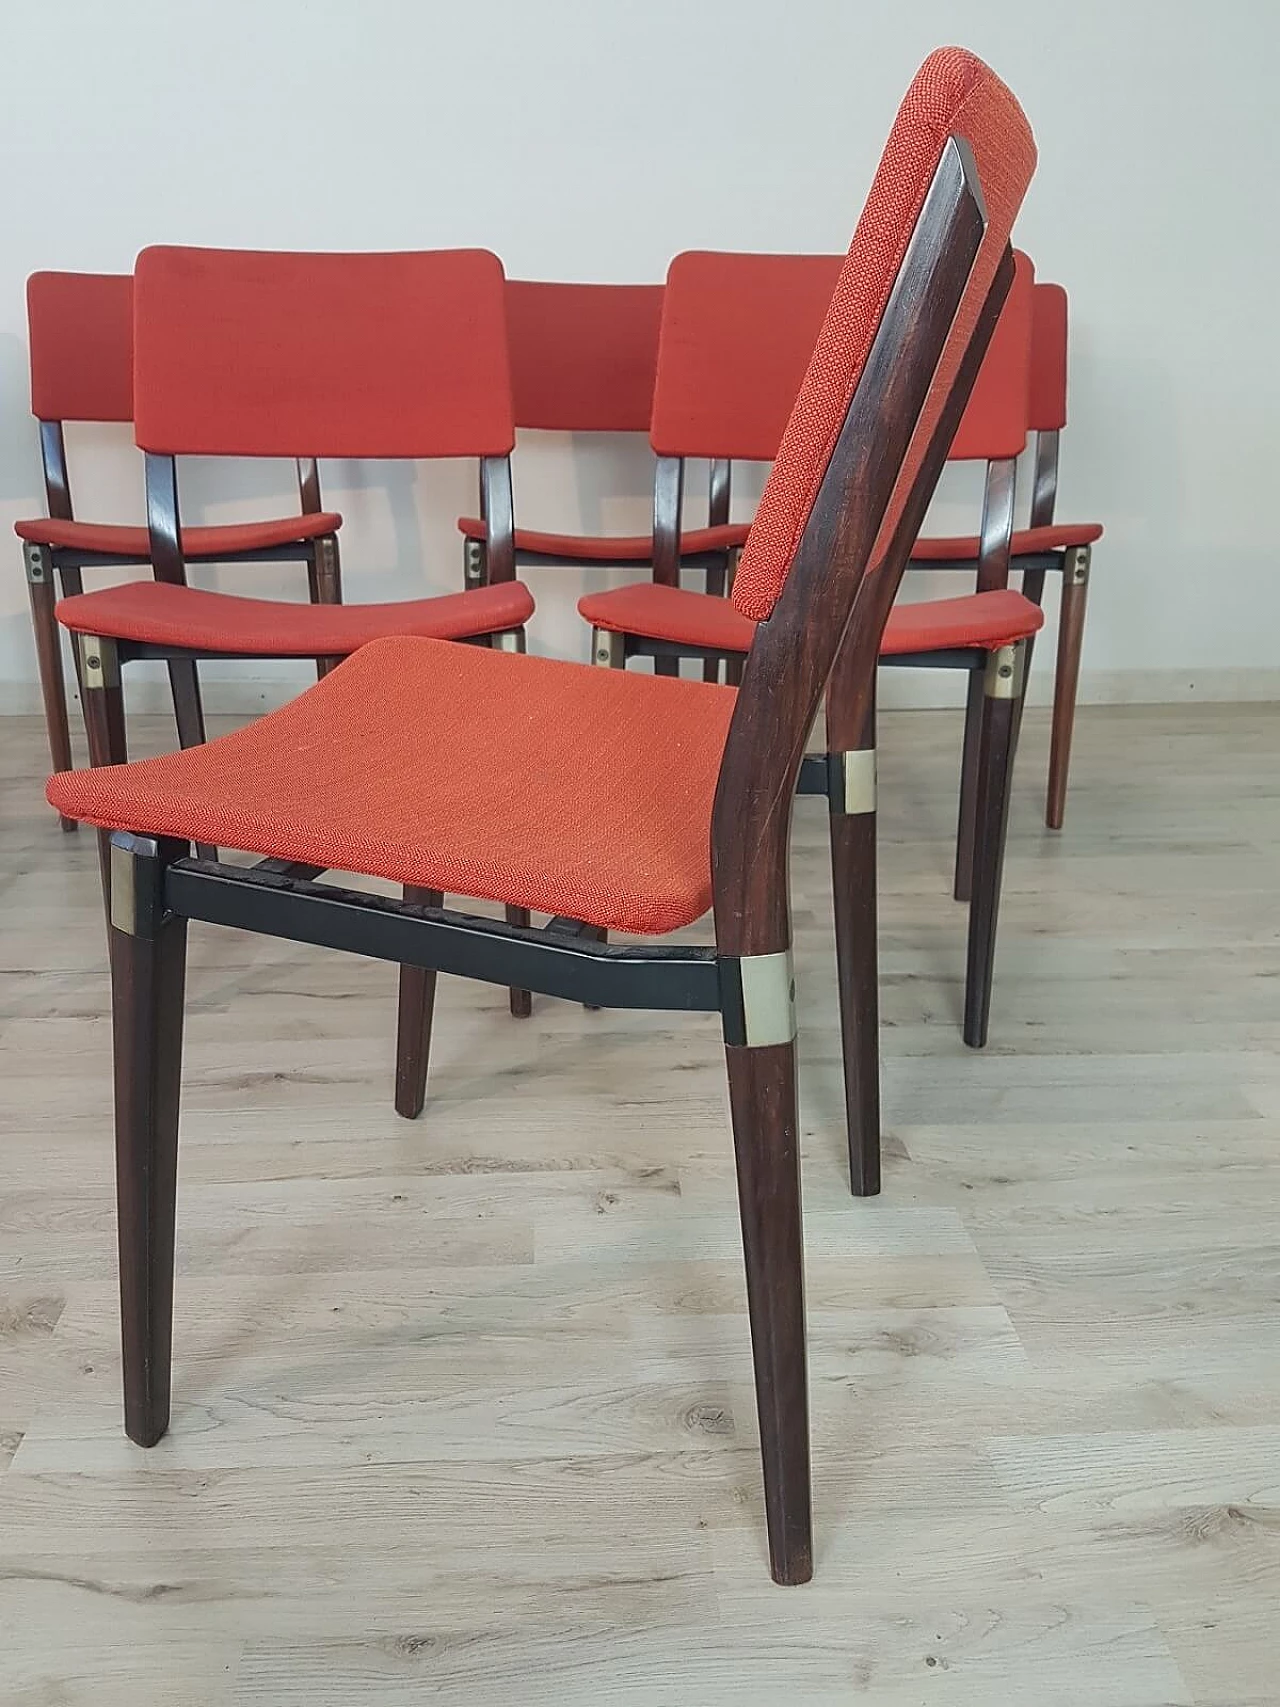 Set of 8 chairs "S82" by Eugenio Gerli for Tecno 6